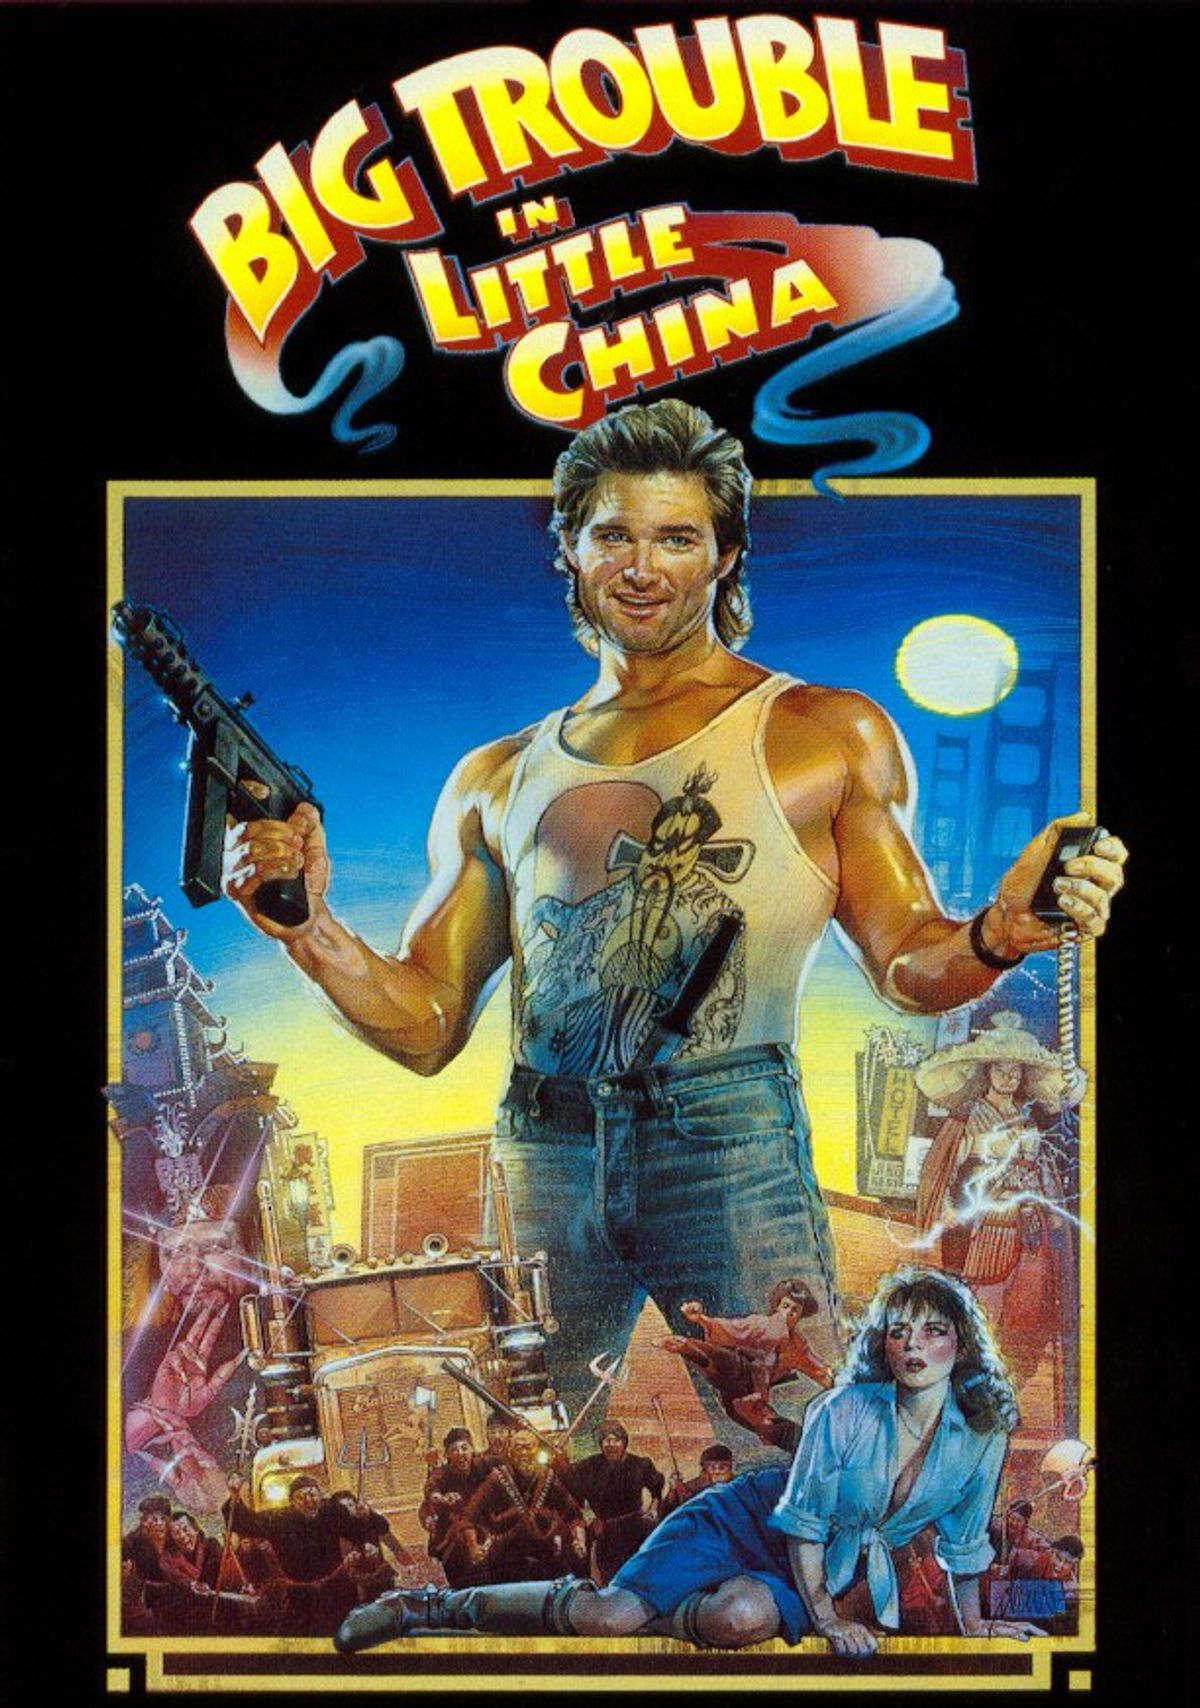 Drunk Movie Review: Big Trouble In Little China